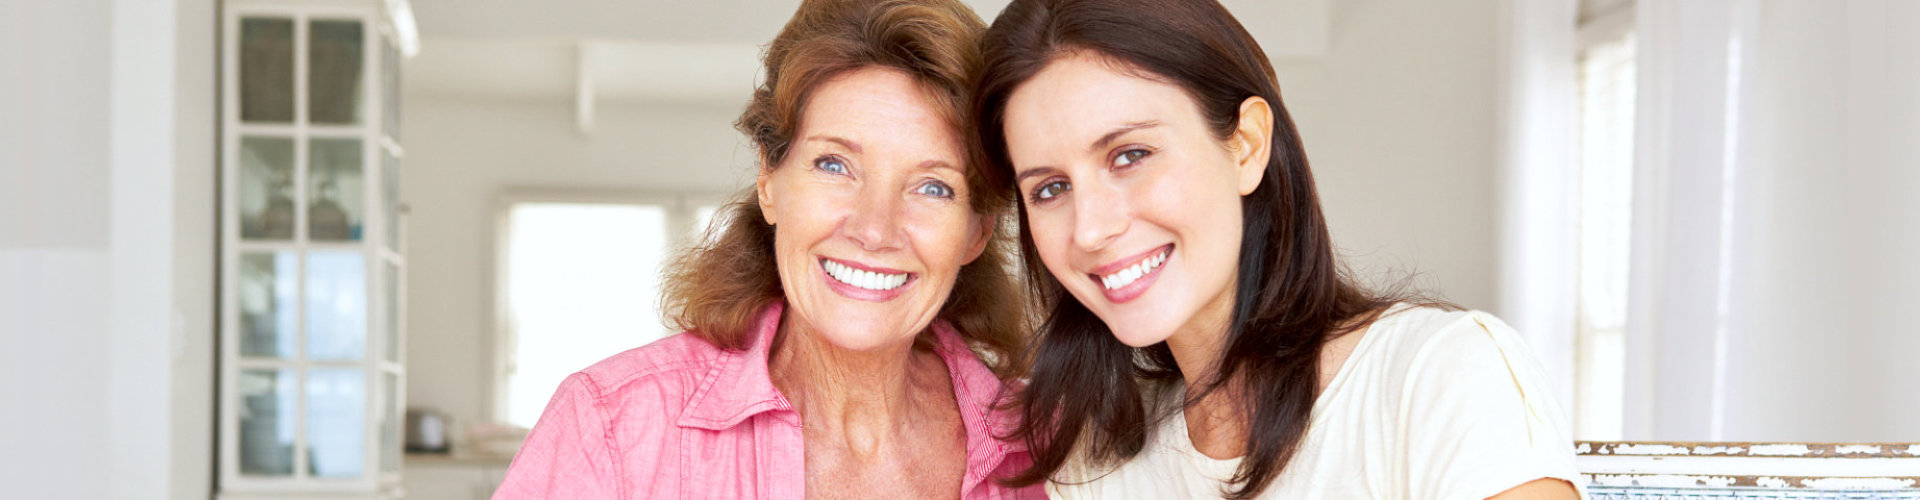 Adult mother and daughter smiling